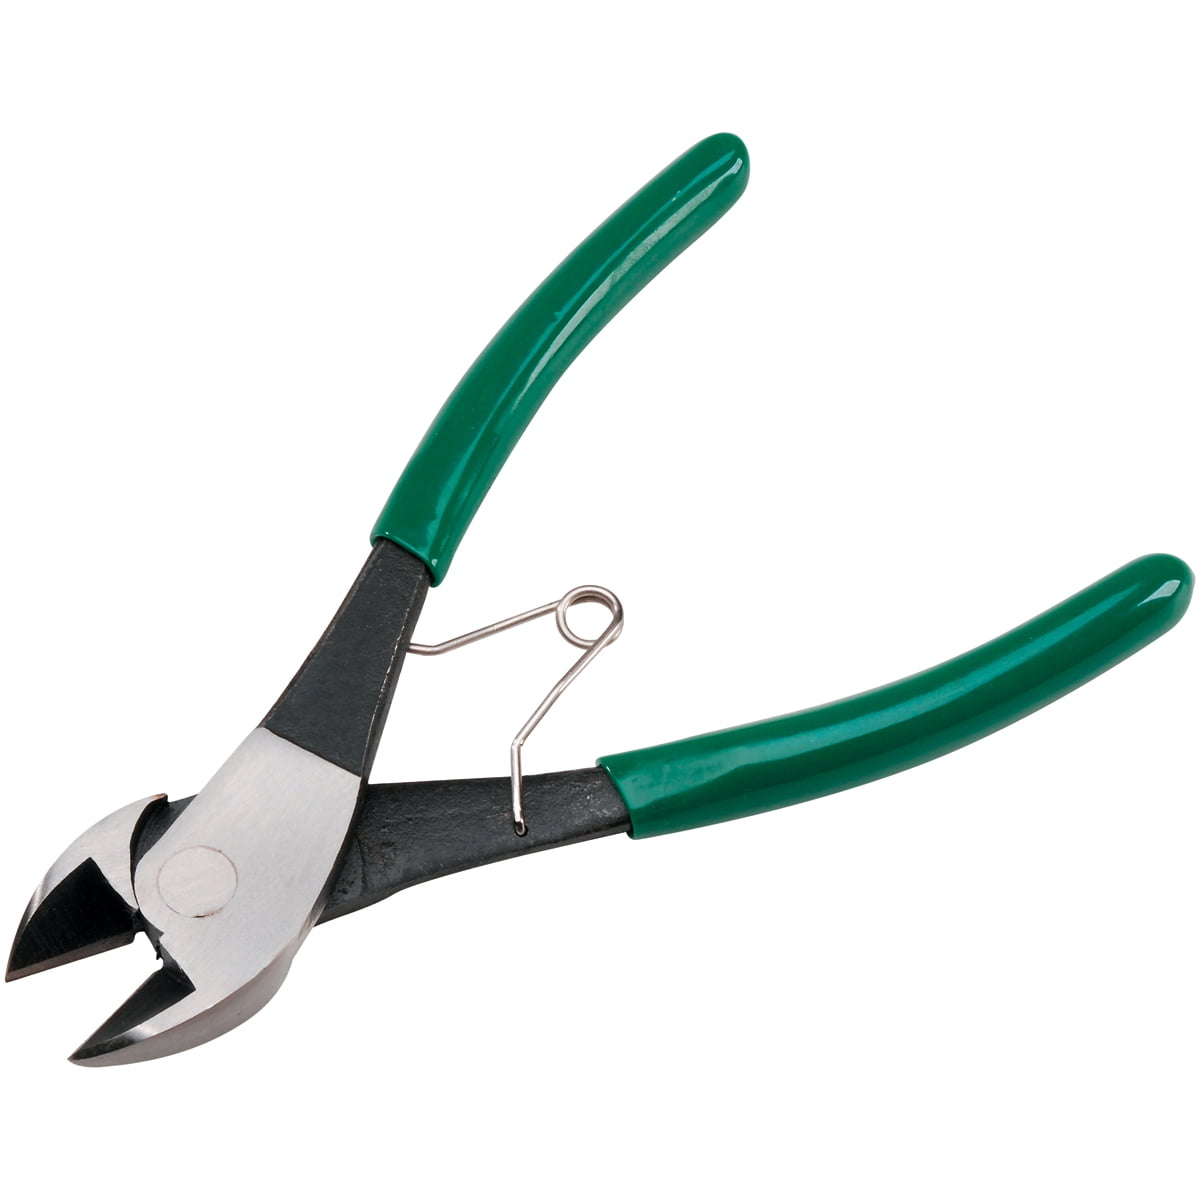 Darice Heavy-Duty Spring Action Floral and Wire Cutter 